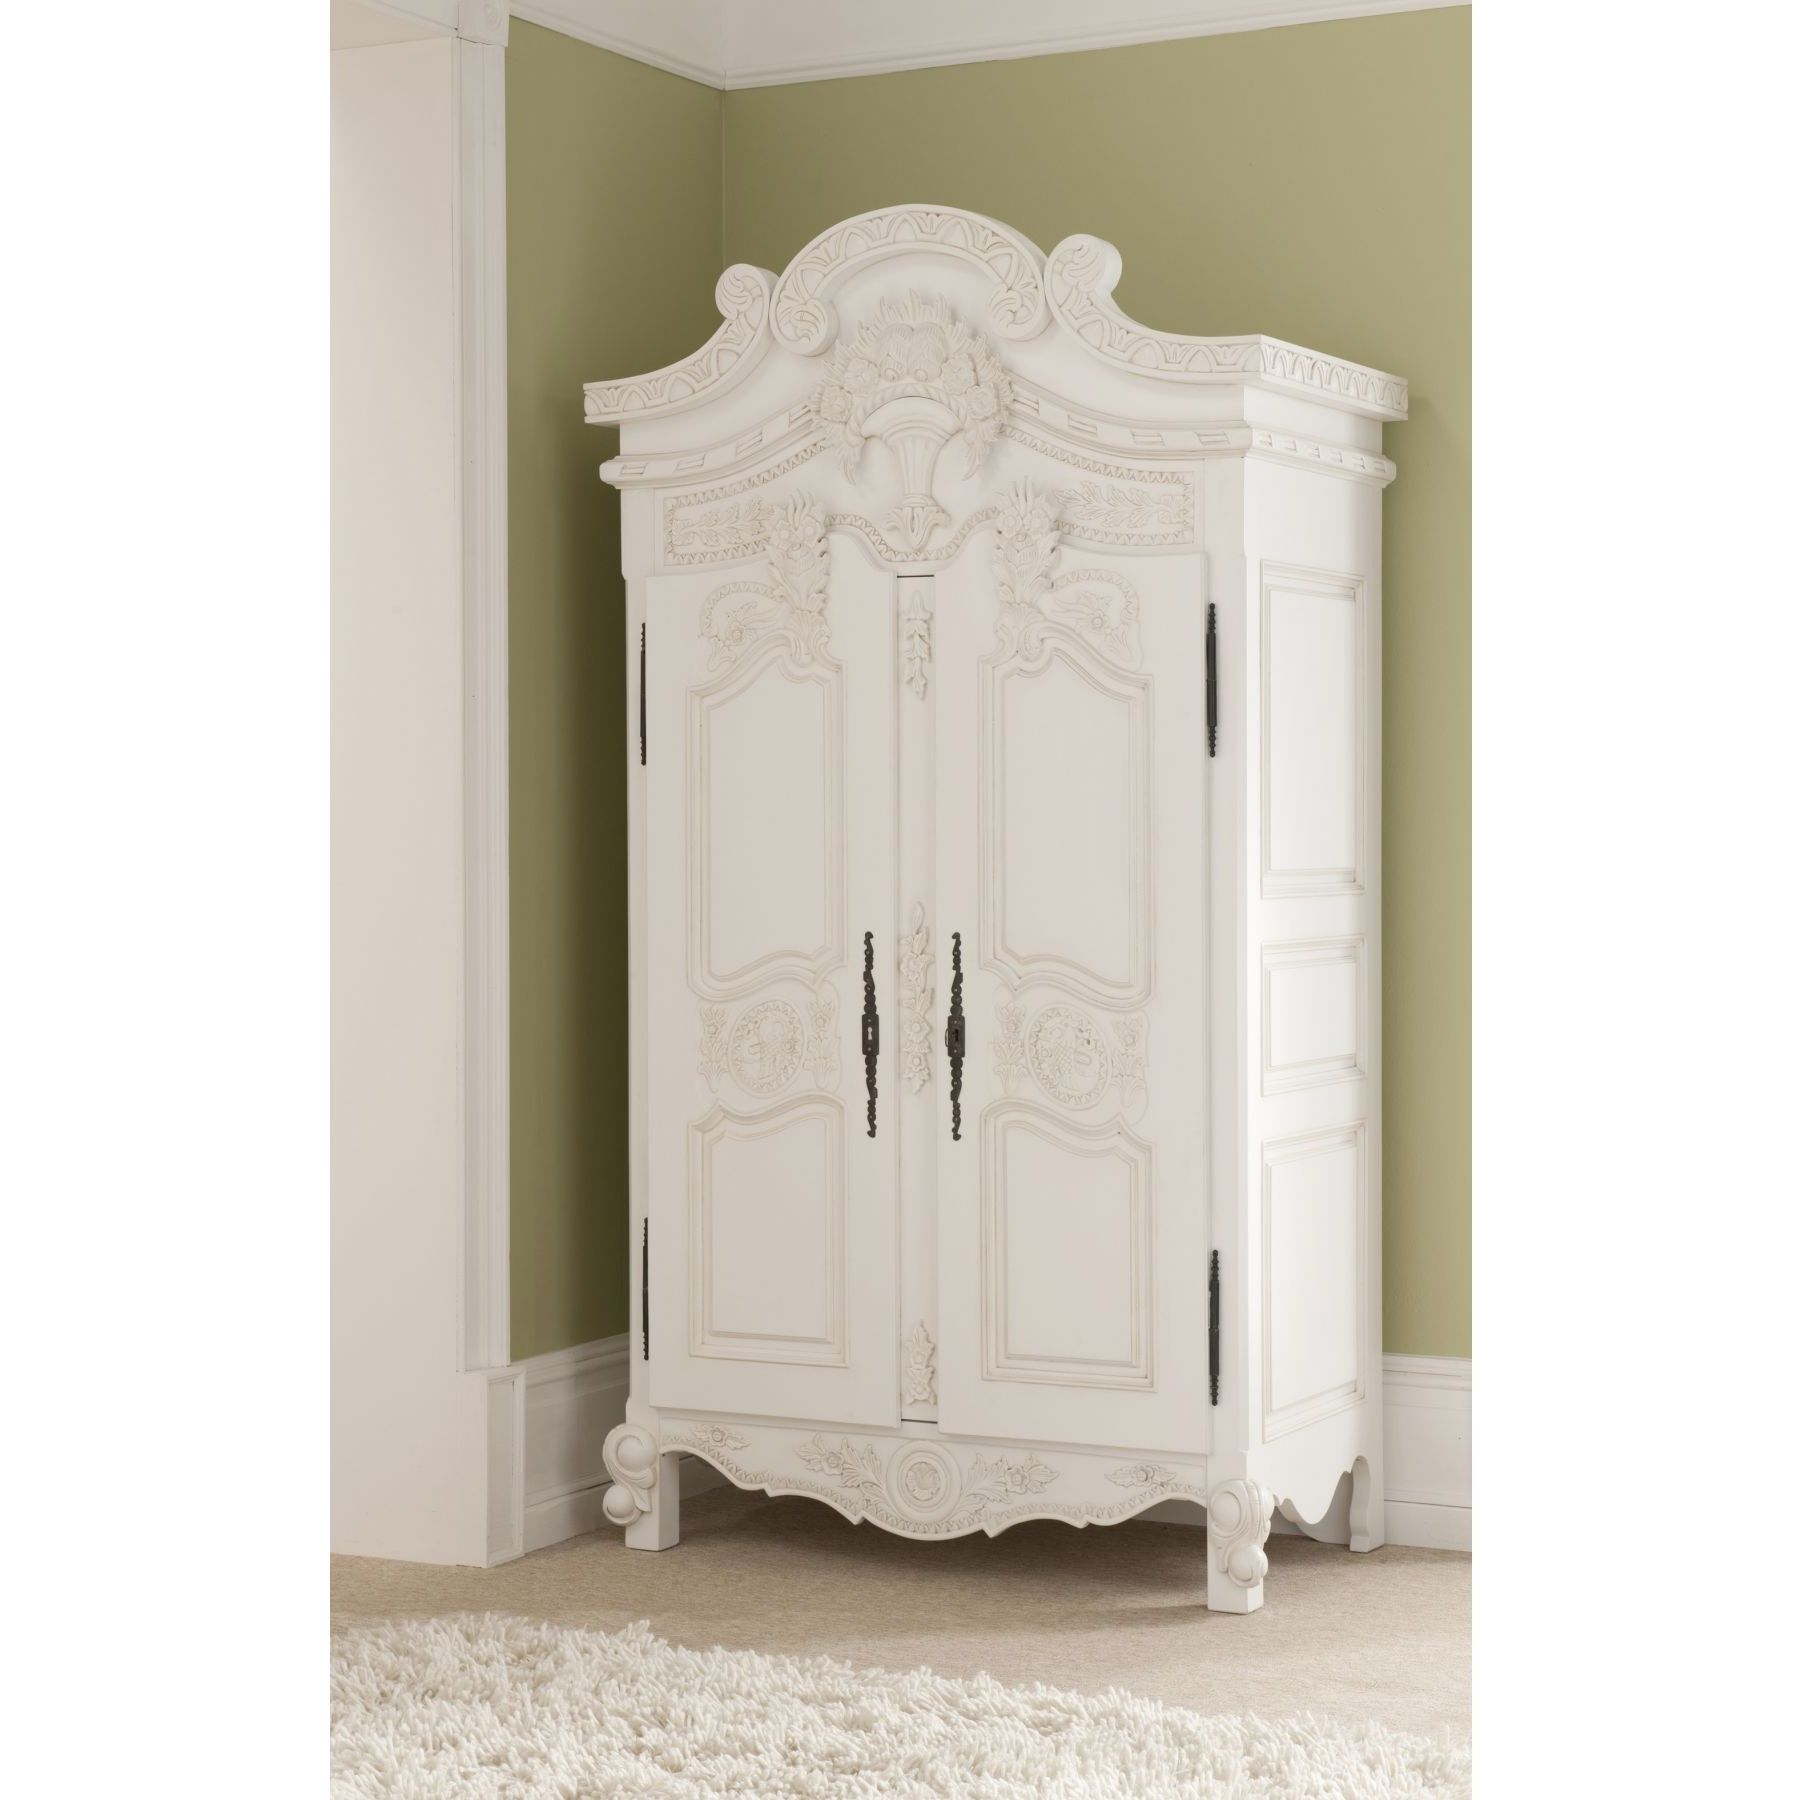 Rococo Antique French Wardrobe A Stunning Addition To Our Shabby With Regard To Widely Used White Shabby Chic Wardrobes (View 5 of 15)